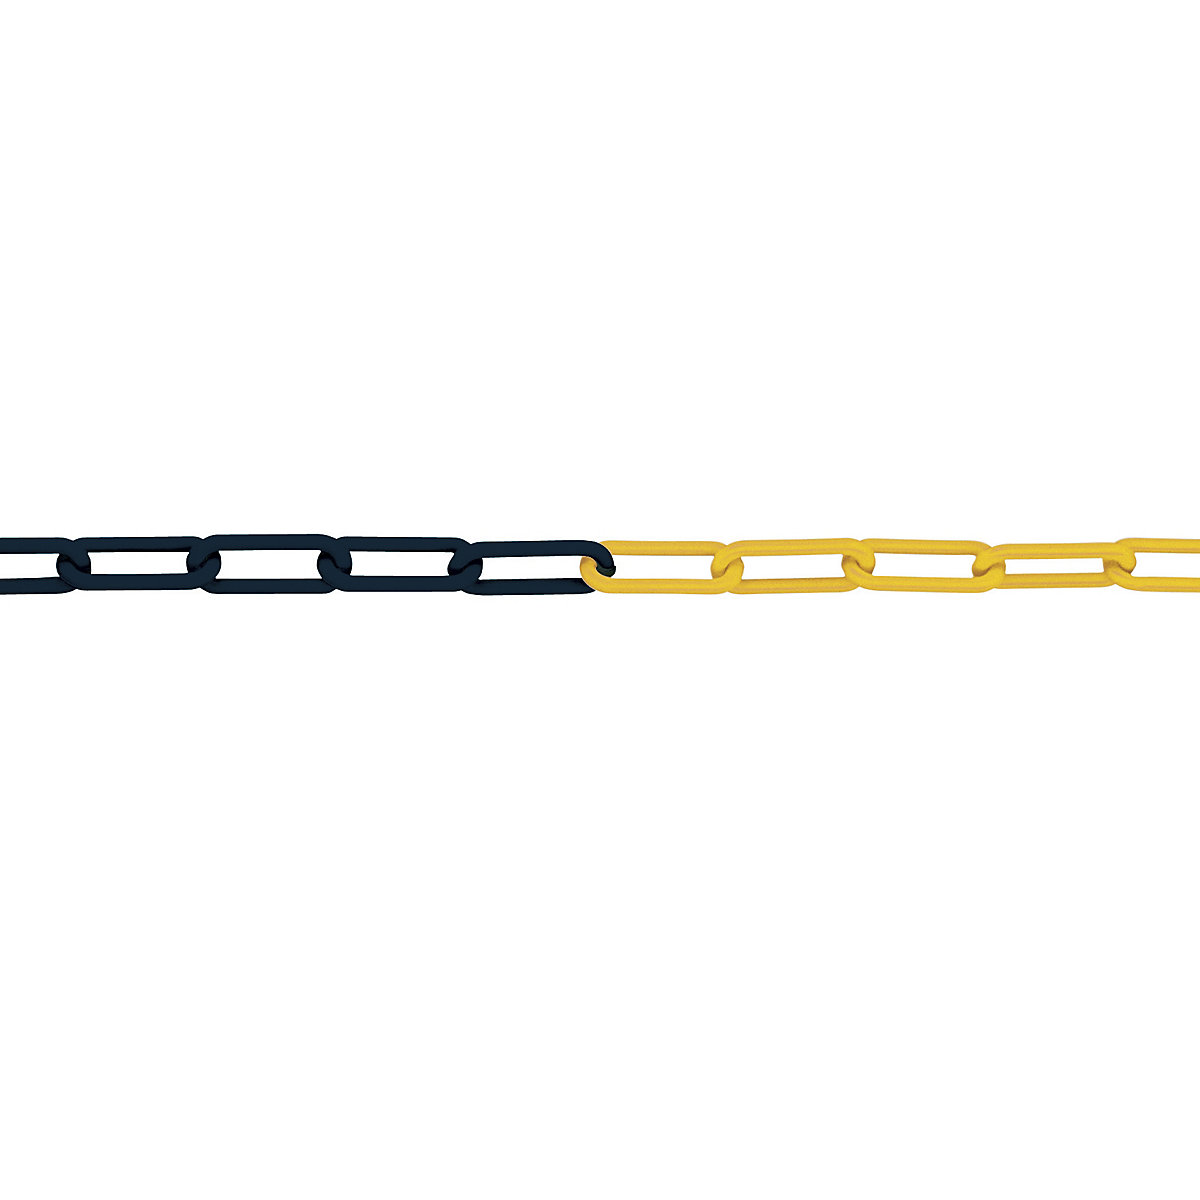 PE link chain, link thickness 8 mm, band length 25 m, black/yellow, 4+ items-1